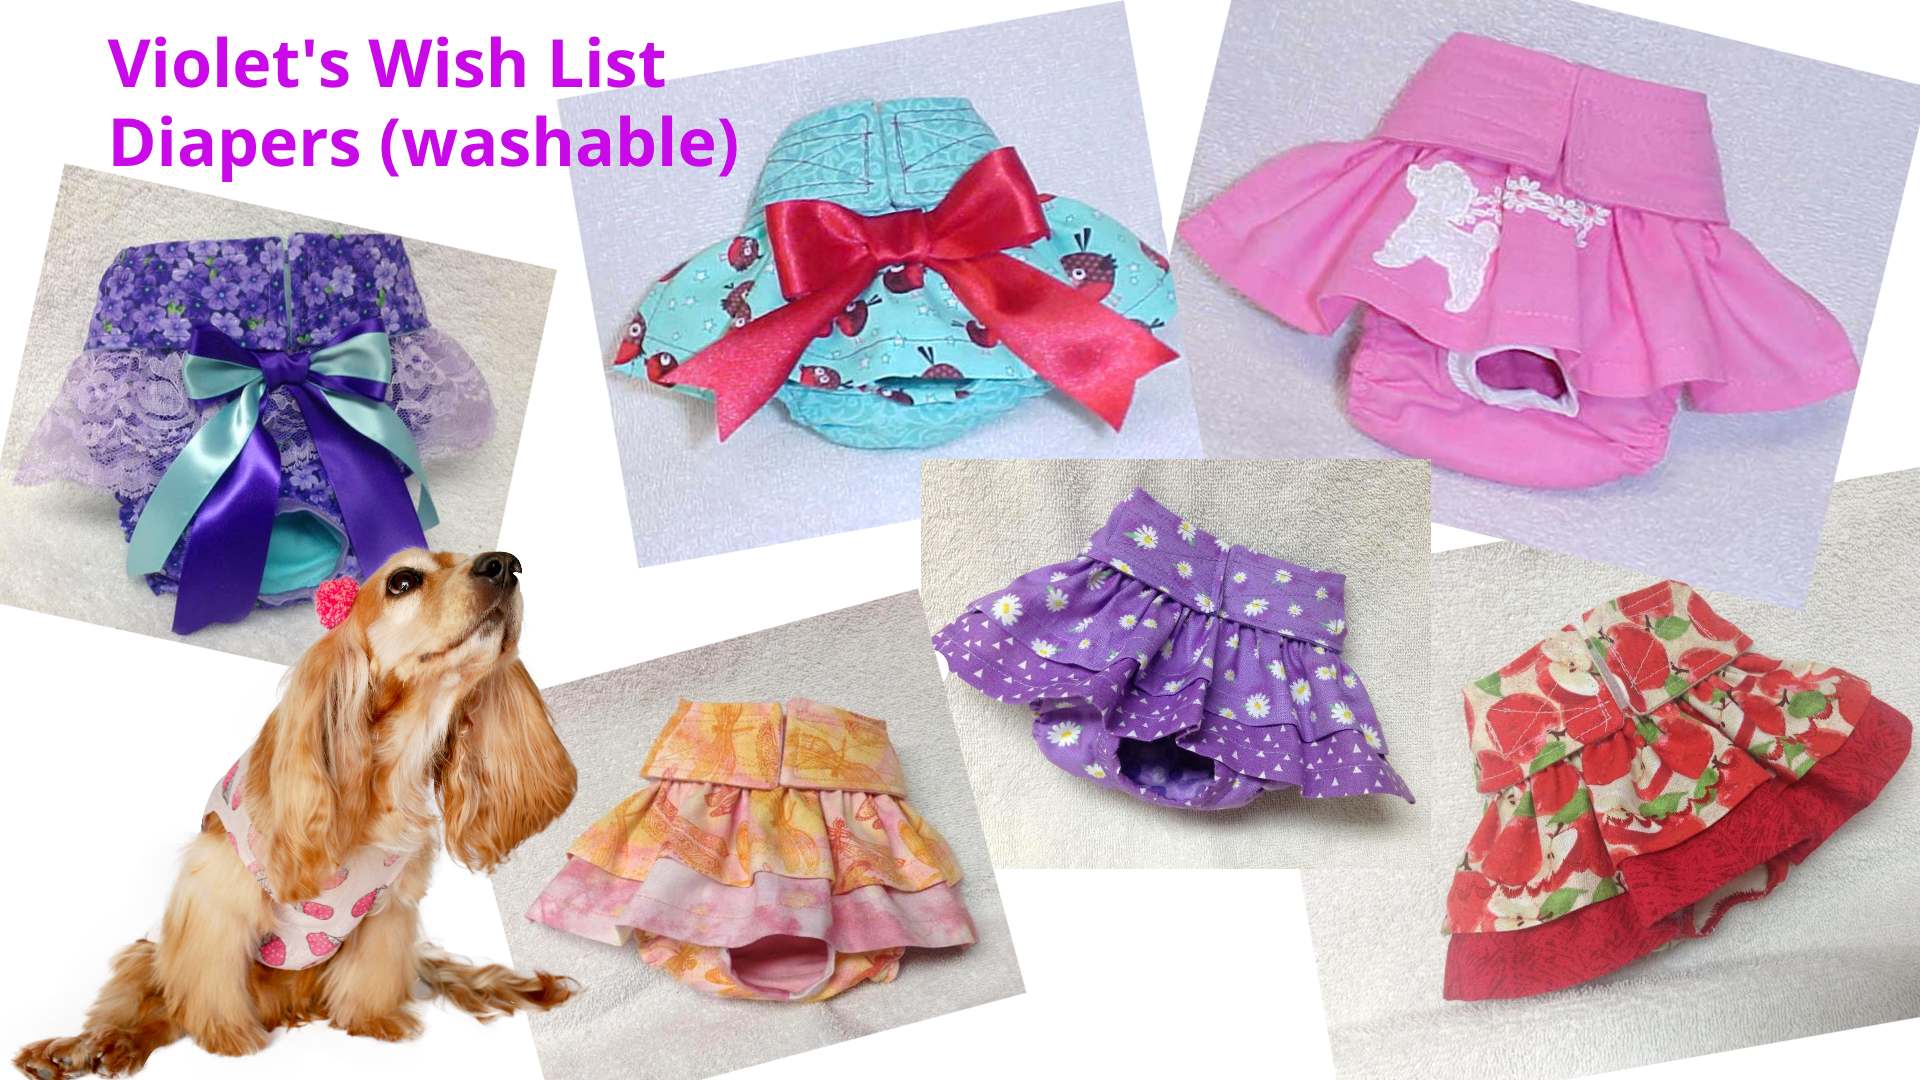 Send Violet a gift from her wish list: doggie diapers